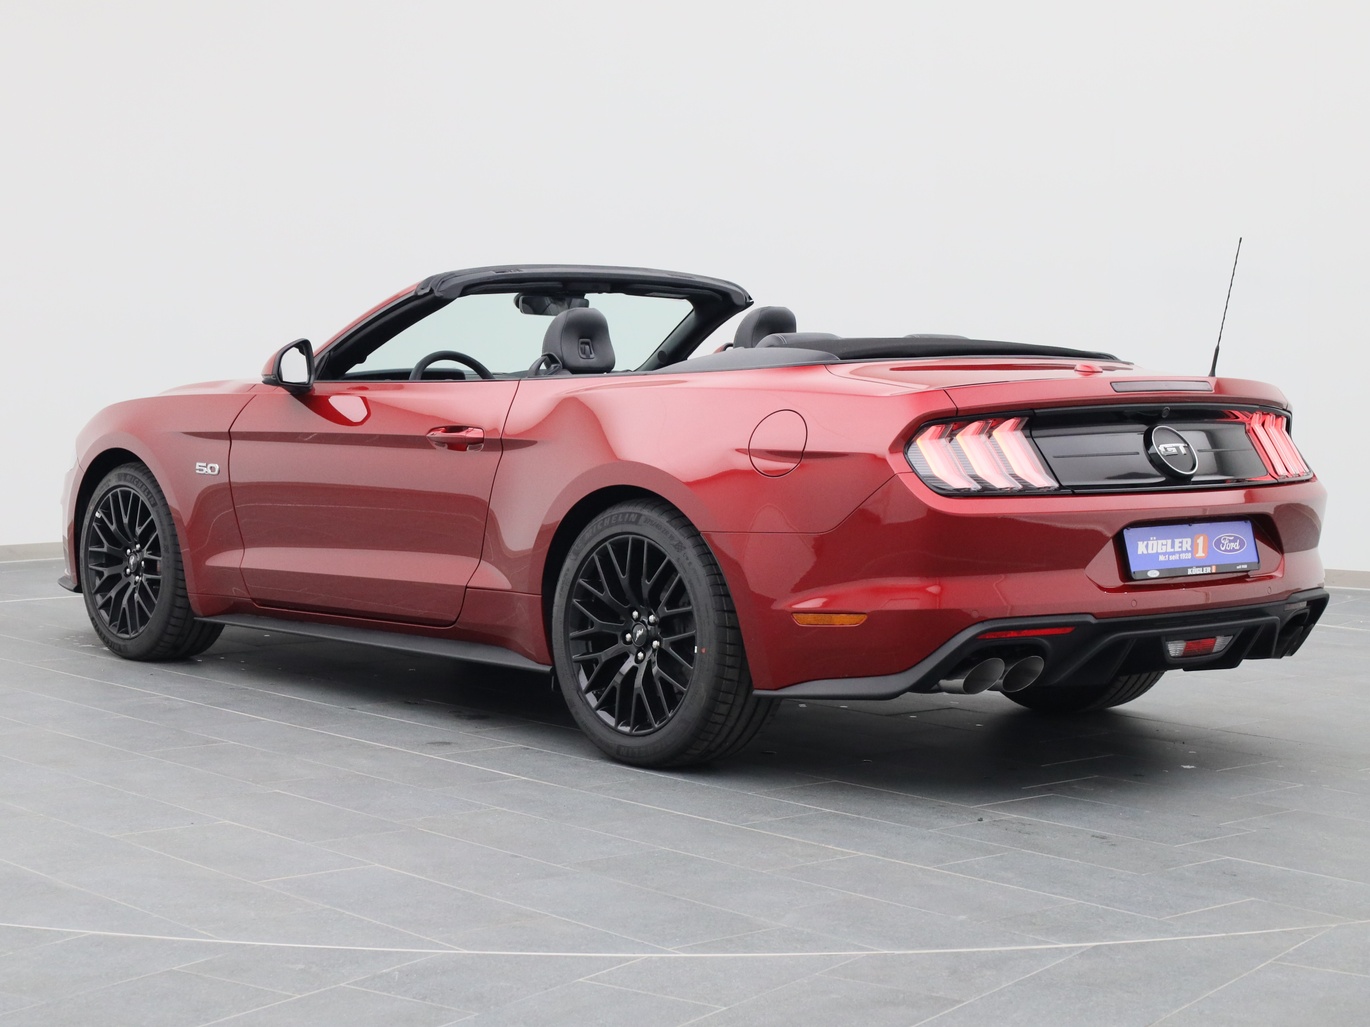  Ford Mustang GT Cabrio V8 450PS / Premium 2 in Lucid Rot 